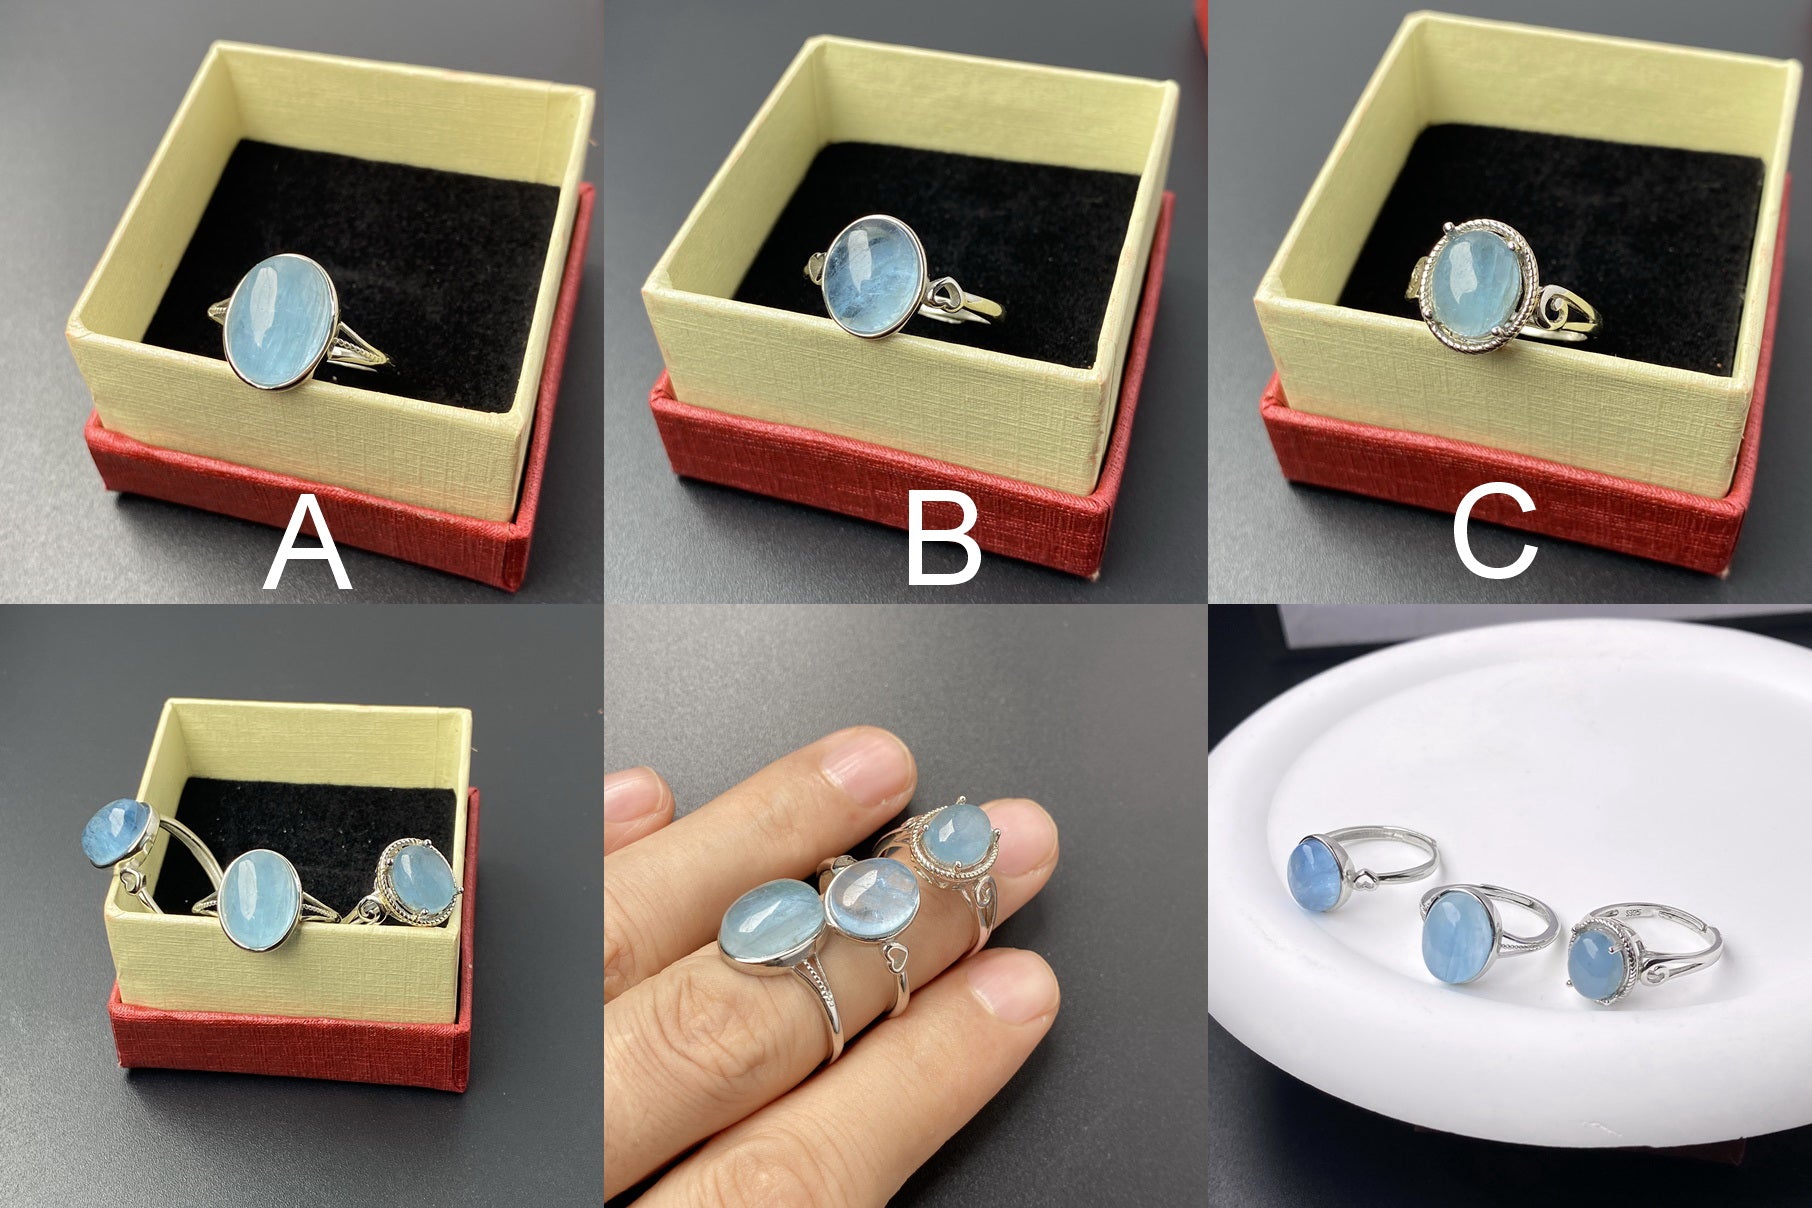 925 sterling silver rings with oval Natural aquamarine cabochon stone